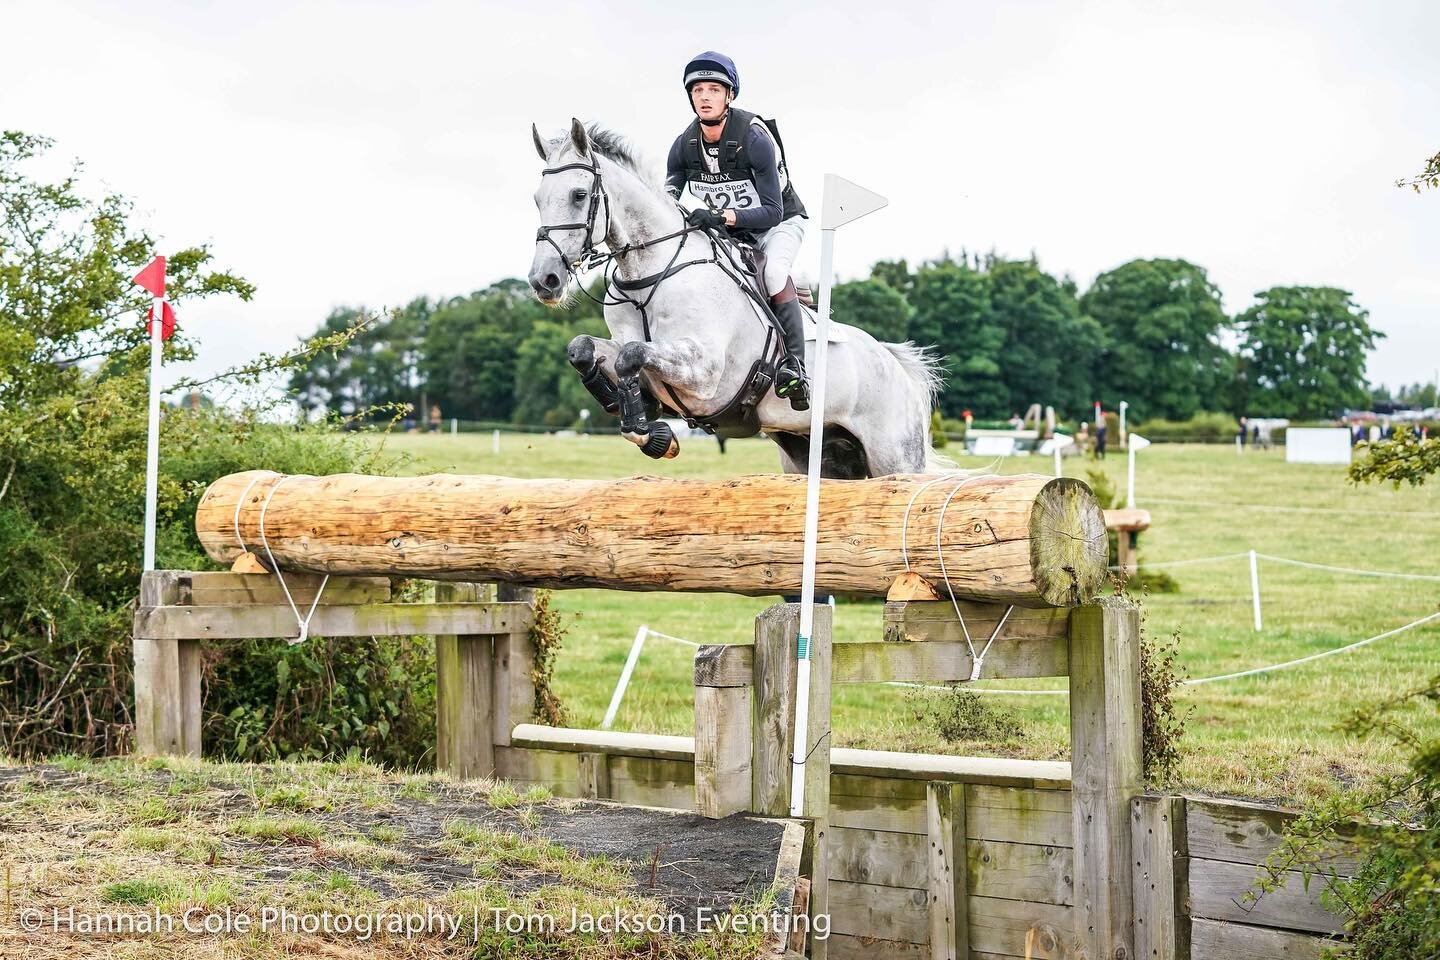 A great week @burghamht with some super results across the board for all 7 horses! 🤩

🏅It was fantastic to have Capels Hollow Drift back at his first event since Badminton and he didn&rsquo;t disappoint&hellip; A PB in the dressage and an awesome D